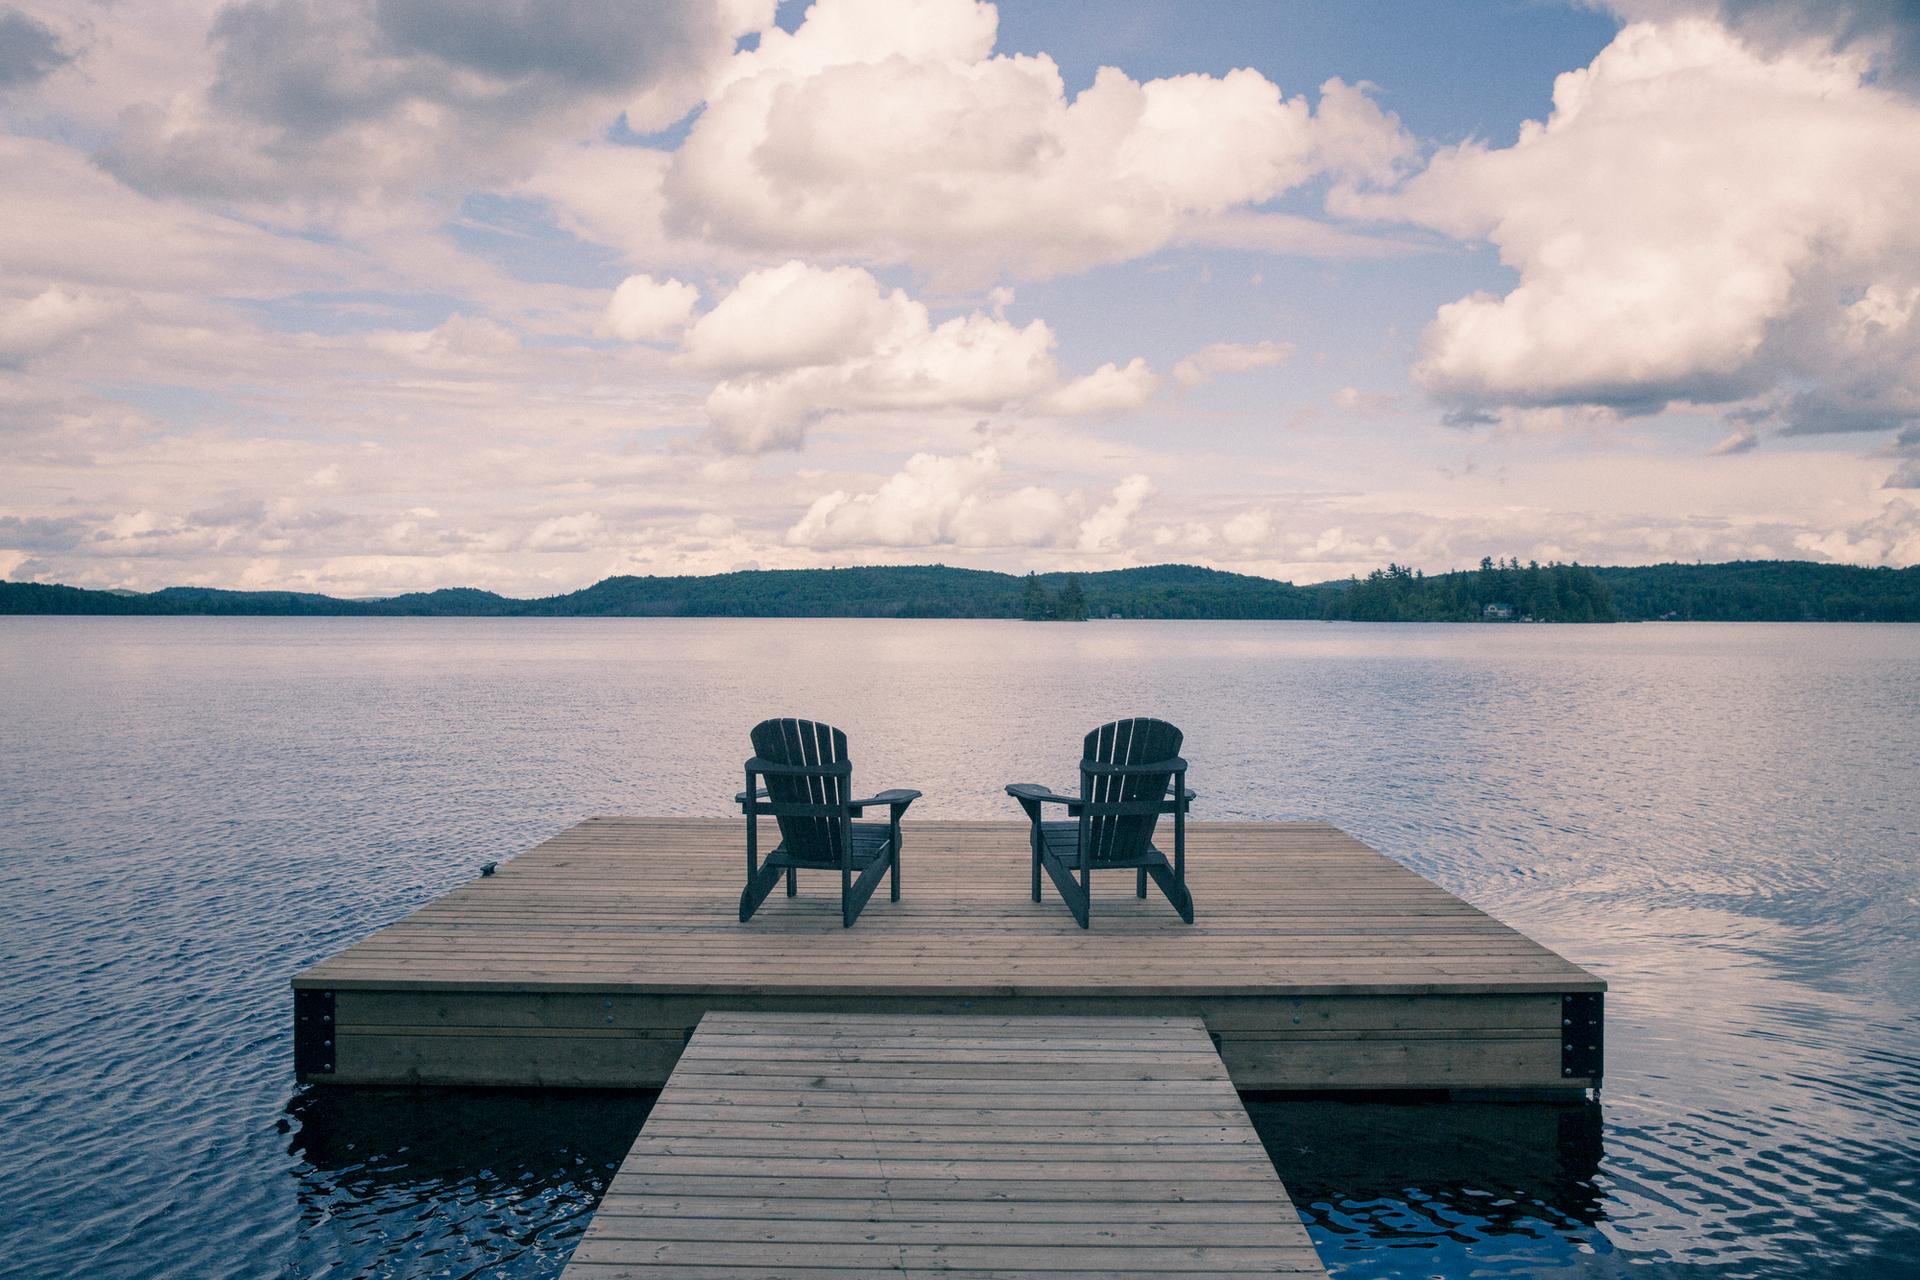 Two wooden lounging chairs on a dock in Muskoka, Ontario